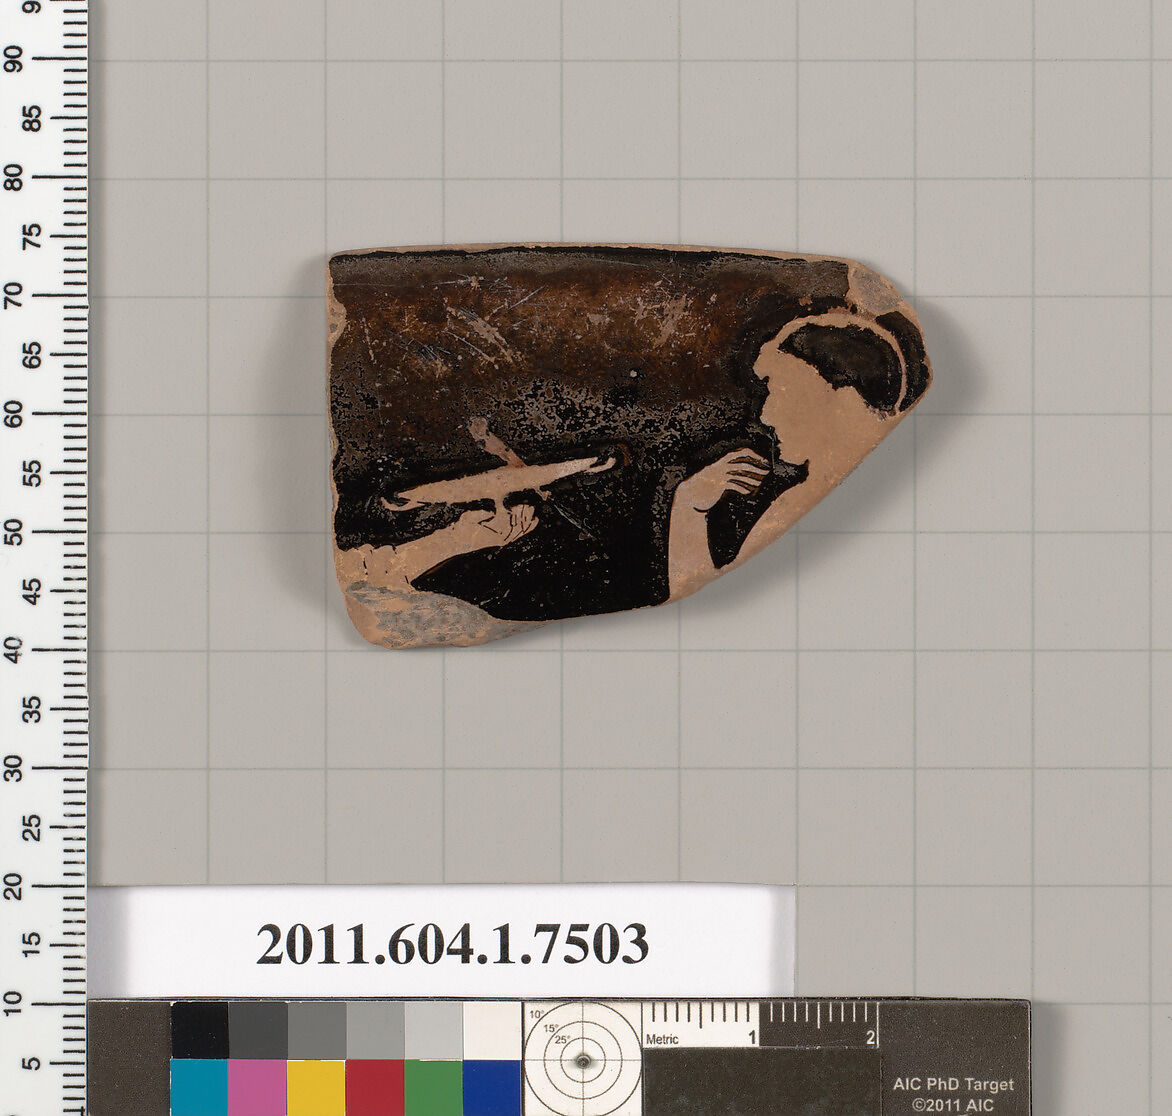 Terracotta rim fragment of a kylix (drinking cup), Attributed to the Euaion Painter [DvB], Terracotta, Greek, Attic 